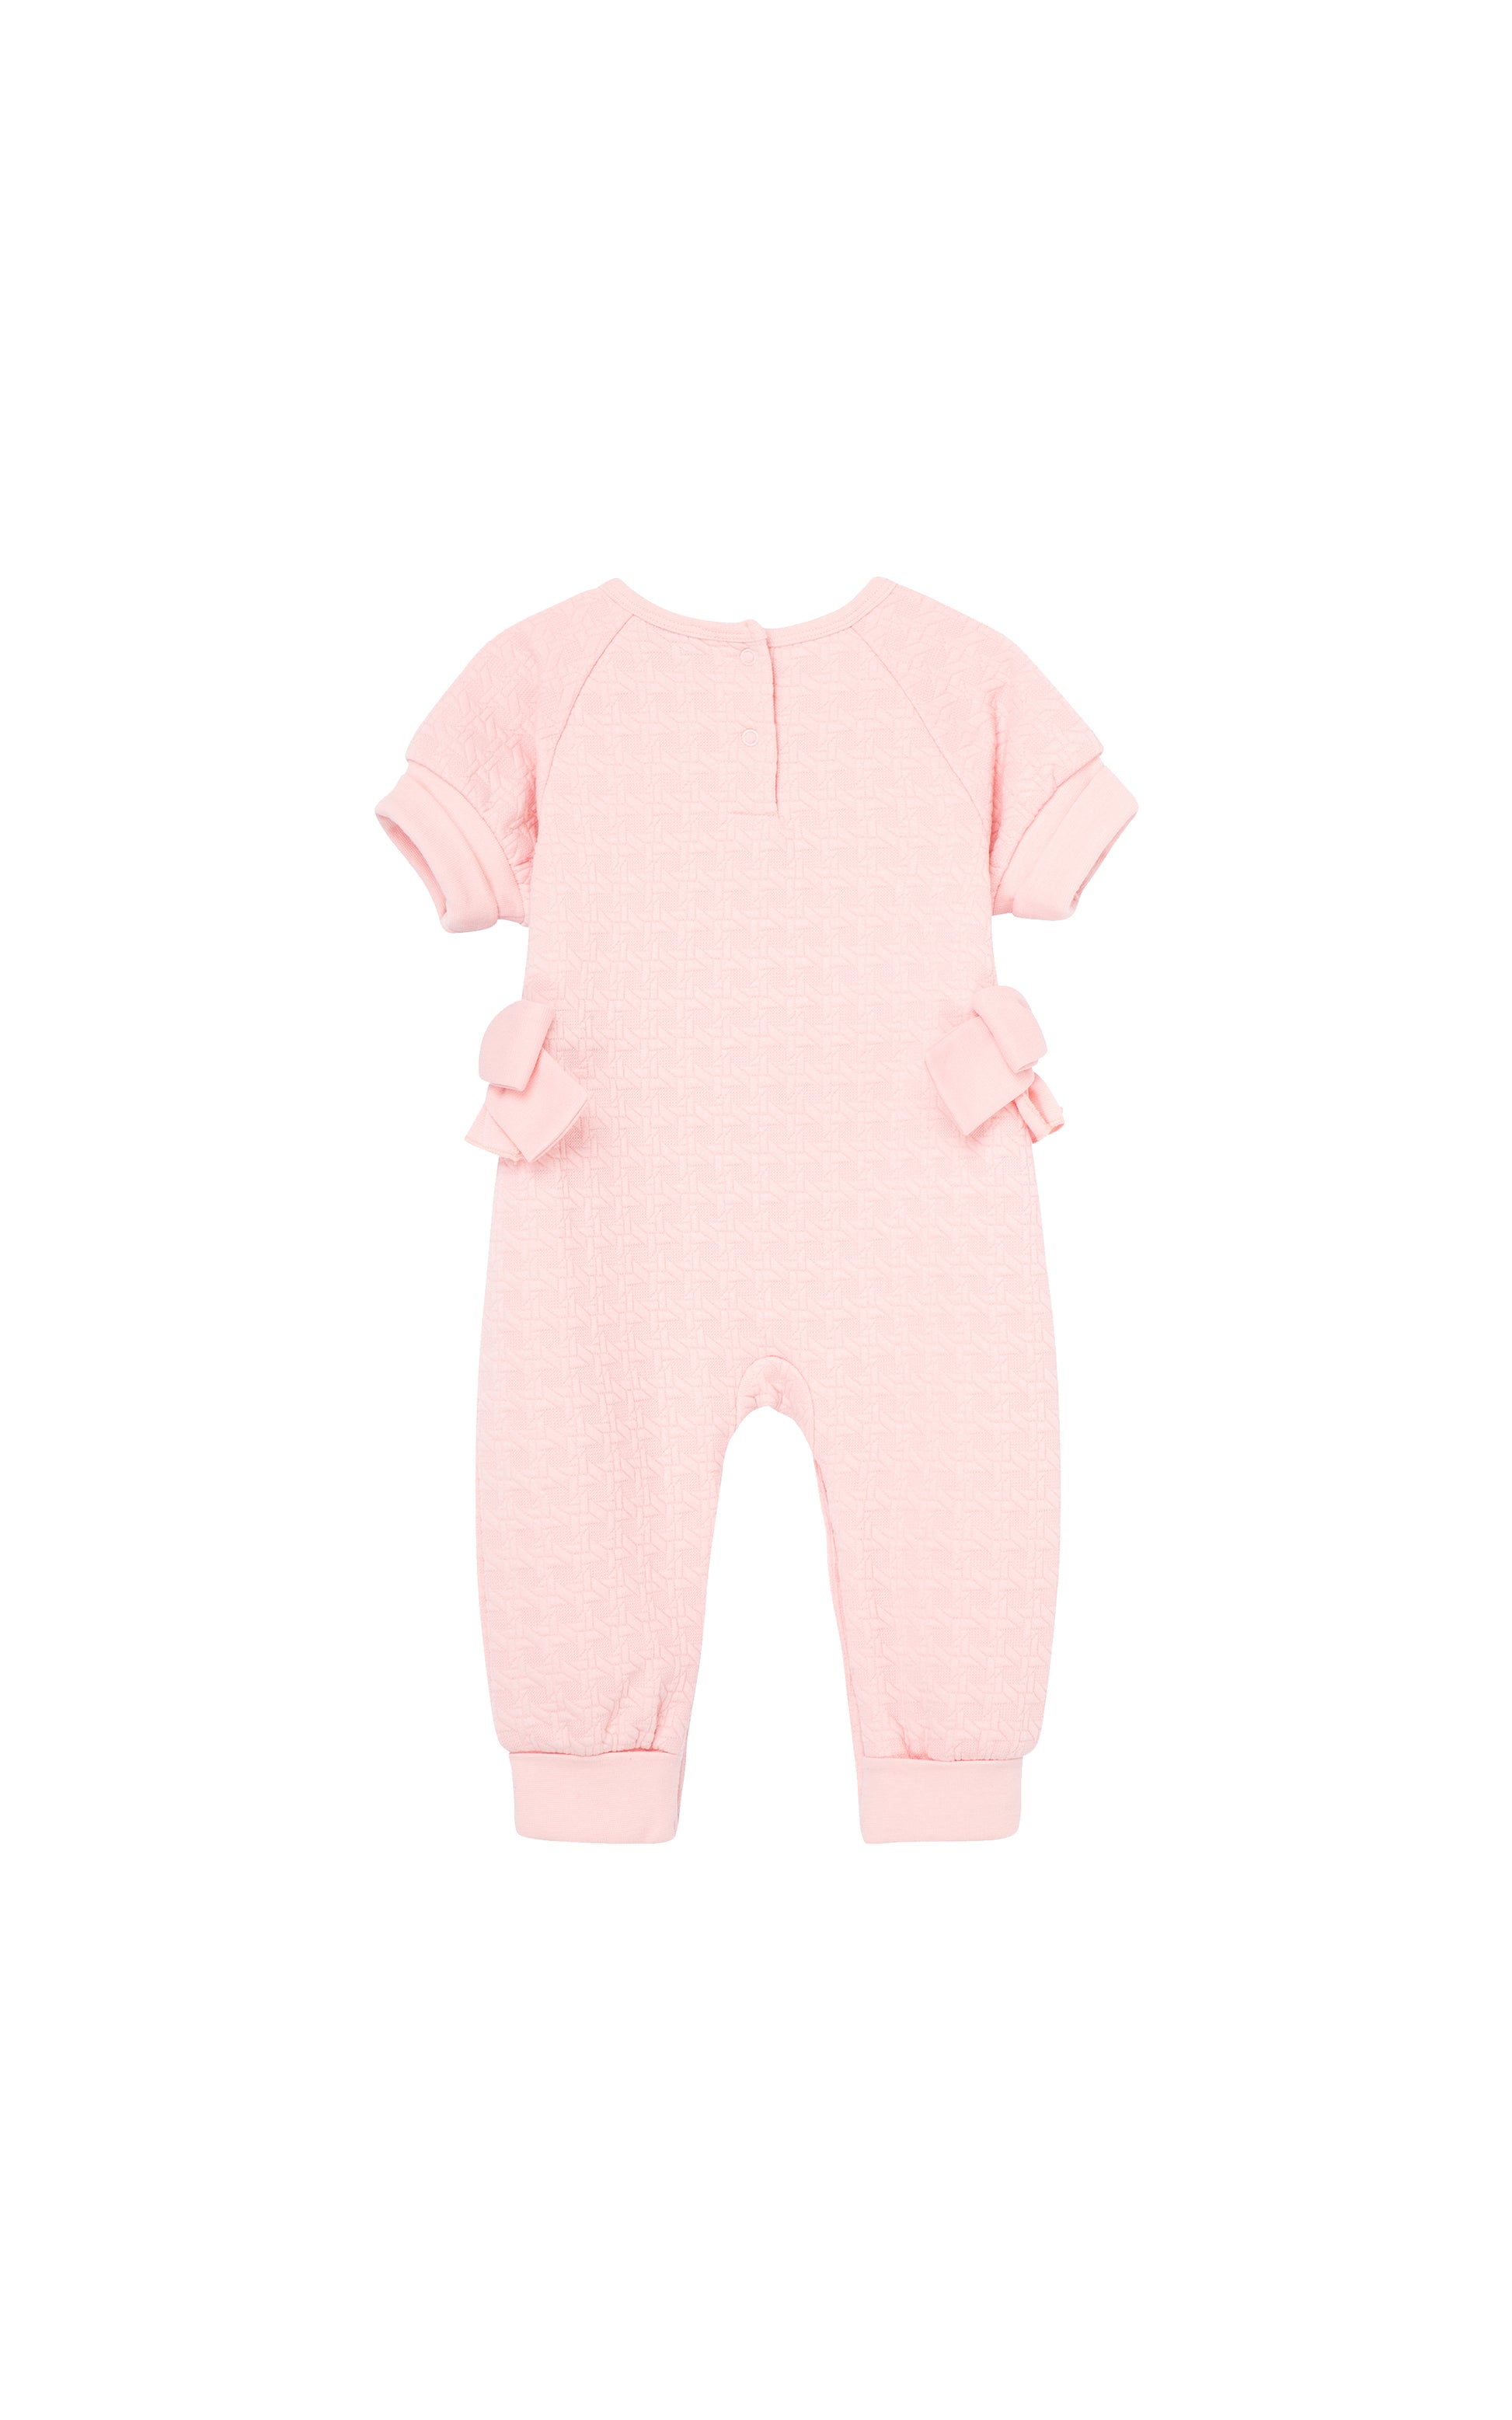 Back view of pink coverall with cuffed short sleeves and ankles, two snap back closure, and bows on both sides